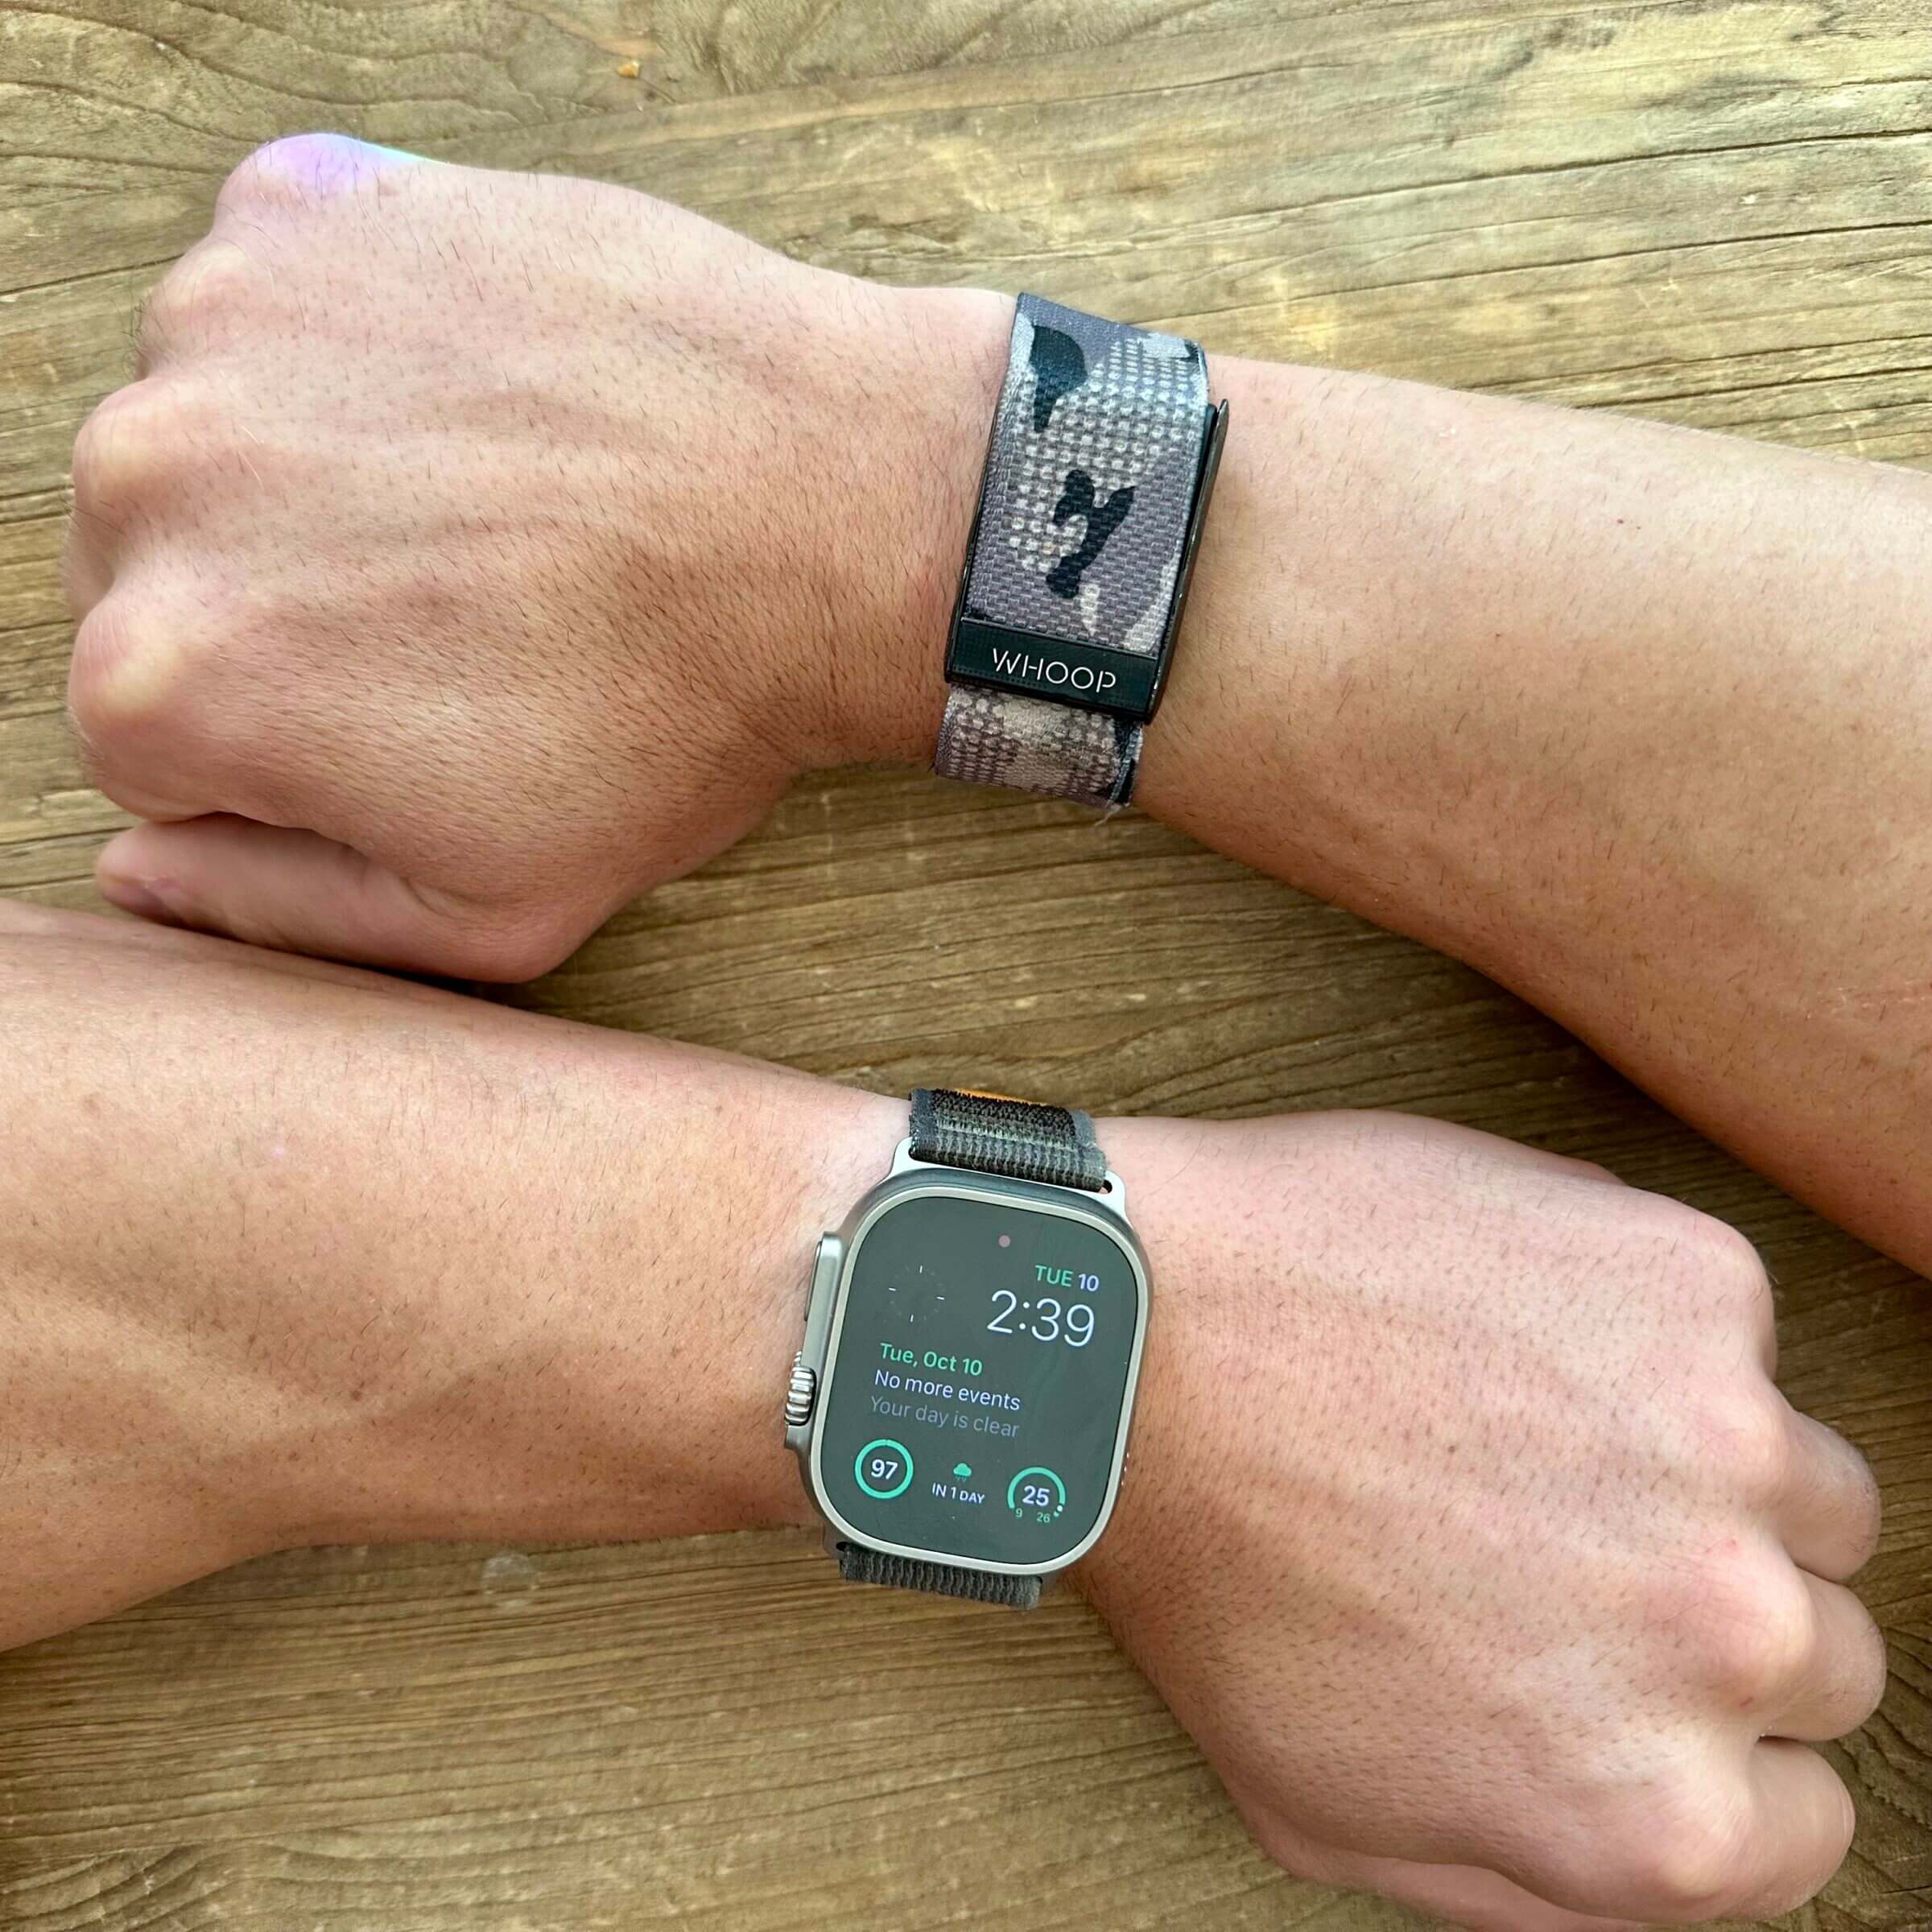 Michael Kummer wearing both an Apple Watch and a Whoop strap.